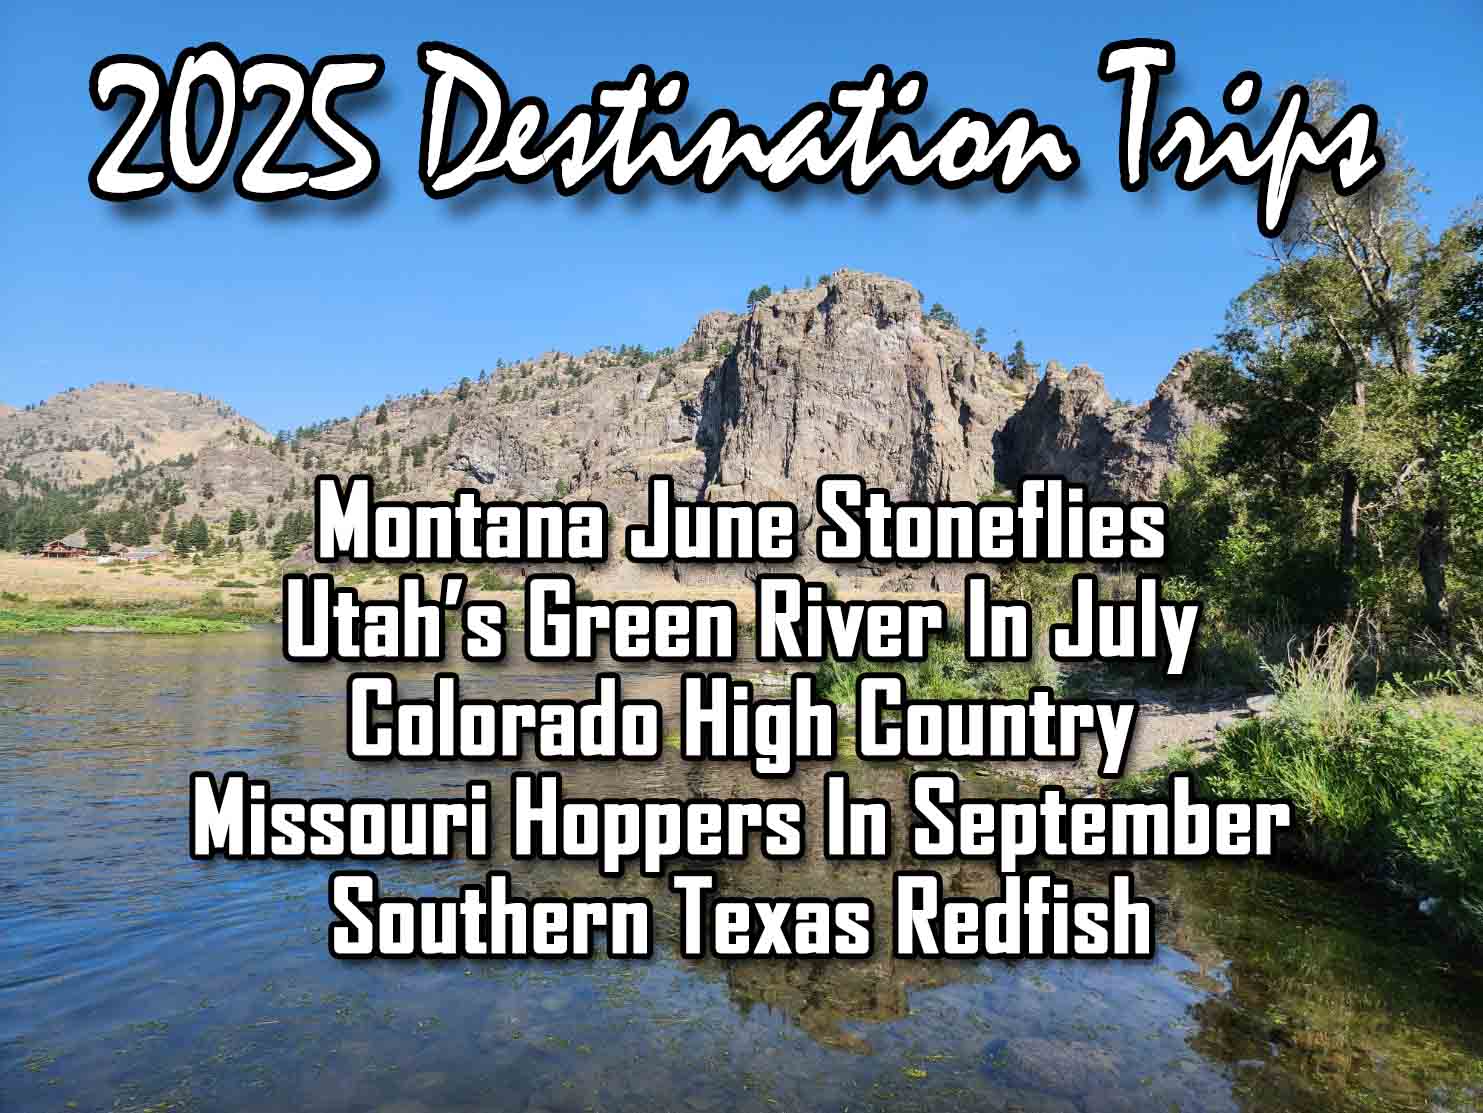 We Have Several Unique Trips Planned For 2025. We Will Fish Rock Creek, Clark Fork, Bitterroot, Blackfoot And The Missouri Rivers In Montana, Colorado's High Country For Trout, Along With The Green River Camping Package In Utah. November We Are Off To Texas For Redfish.